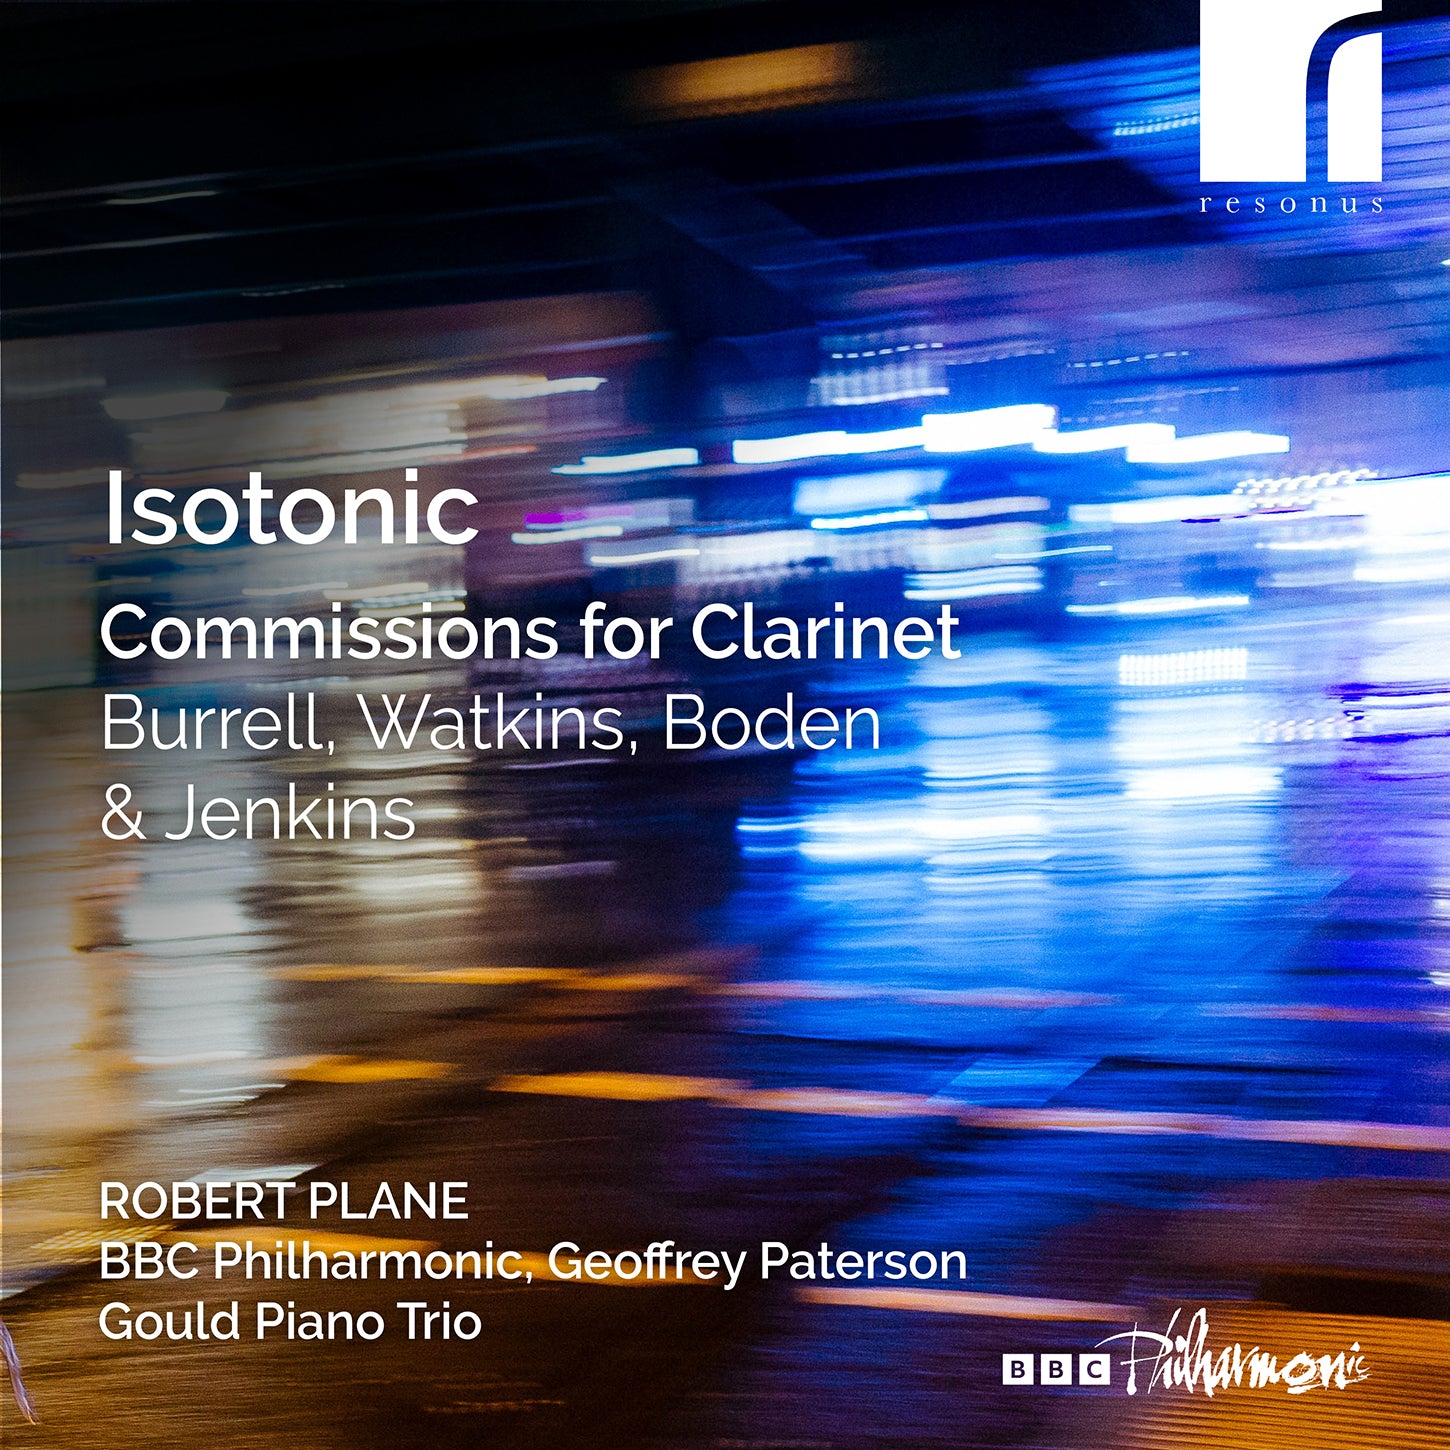 Burrell, Watkins, Boden & Jenkins: Isotonic - Commissions for Clarinet